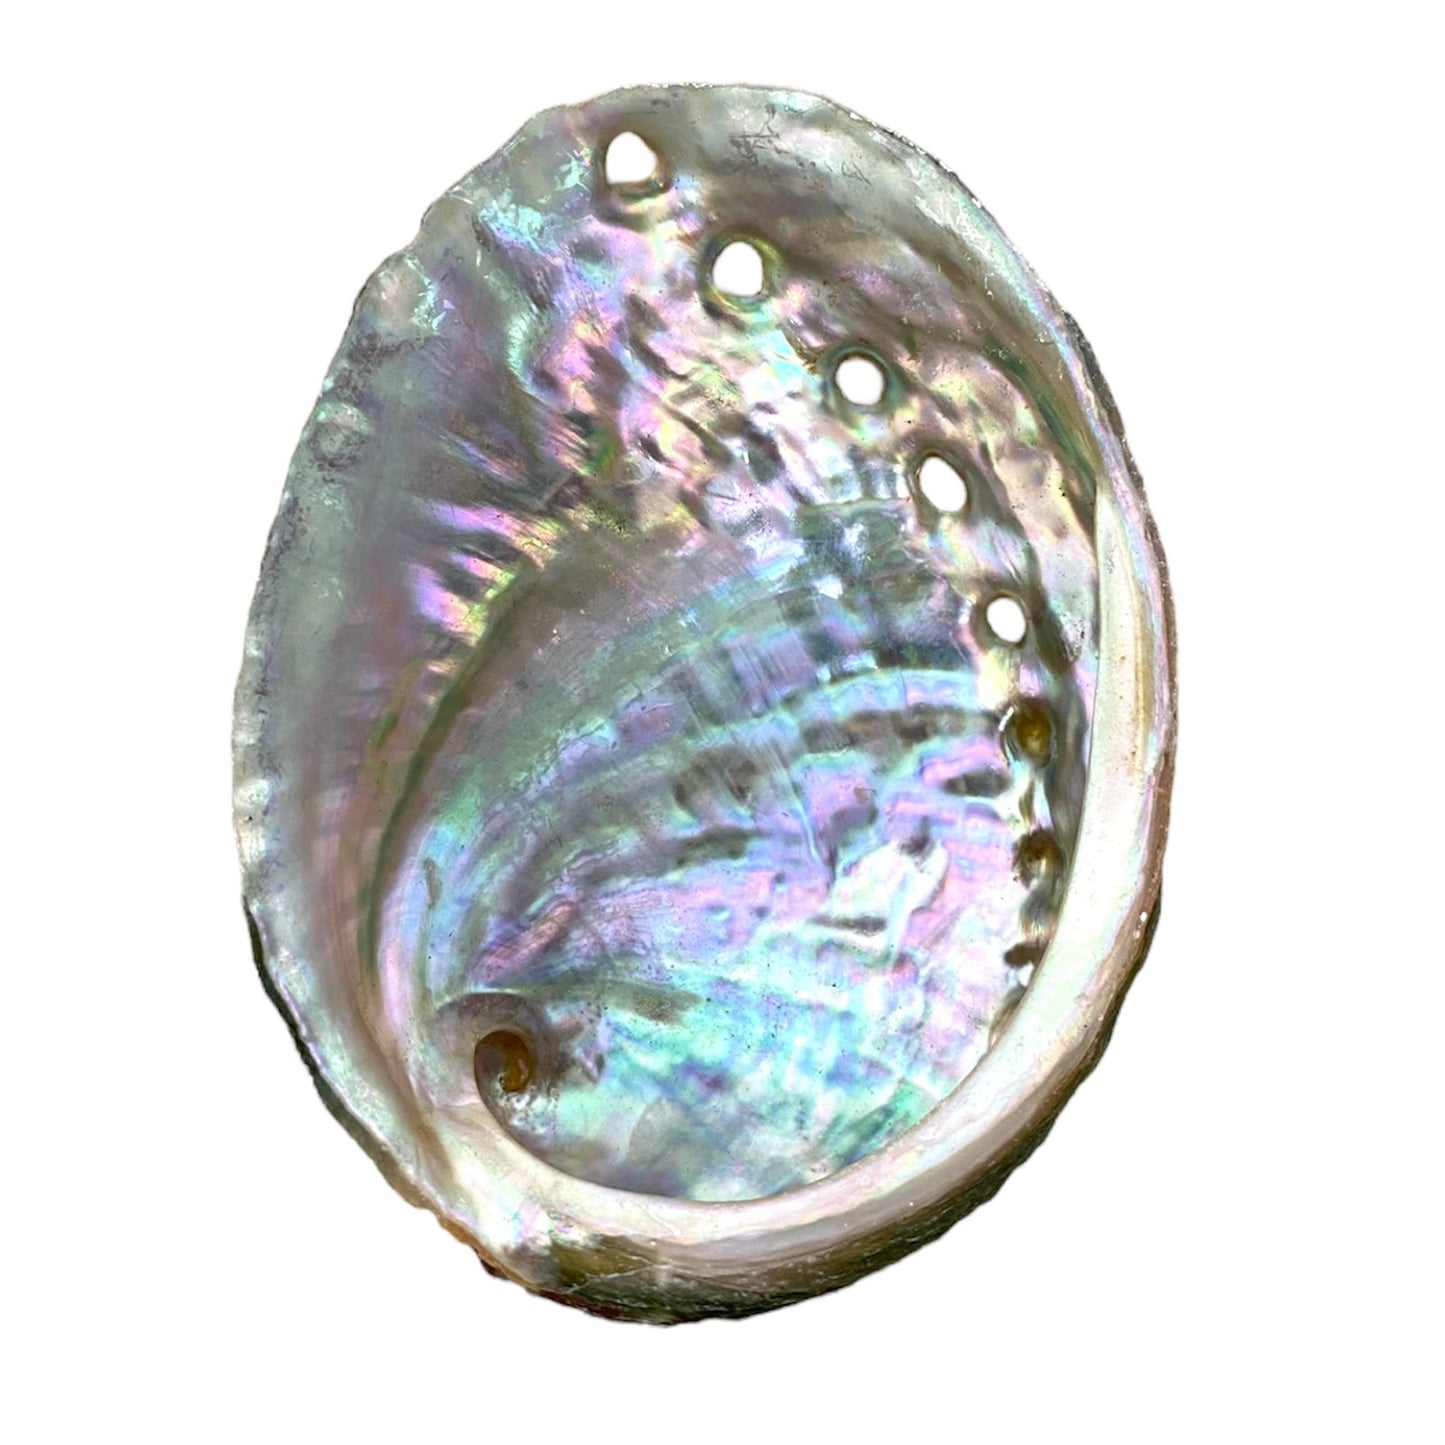 NessaStores 3 Abalone Shells 2.5 to 3.5 Inches | Beautiful All Natural Smudge Bowl - Perfect for Smudge Sticks, Incense Sticks and a Sage Smudge Kit. #JC-020